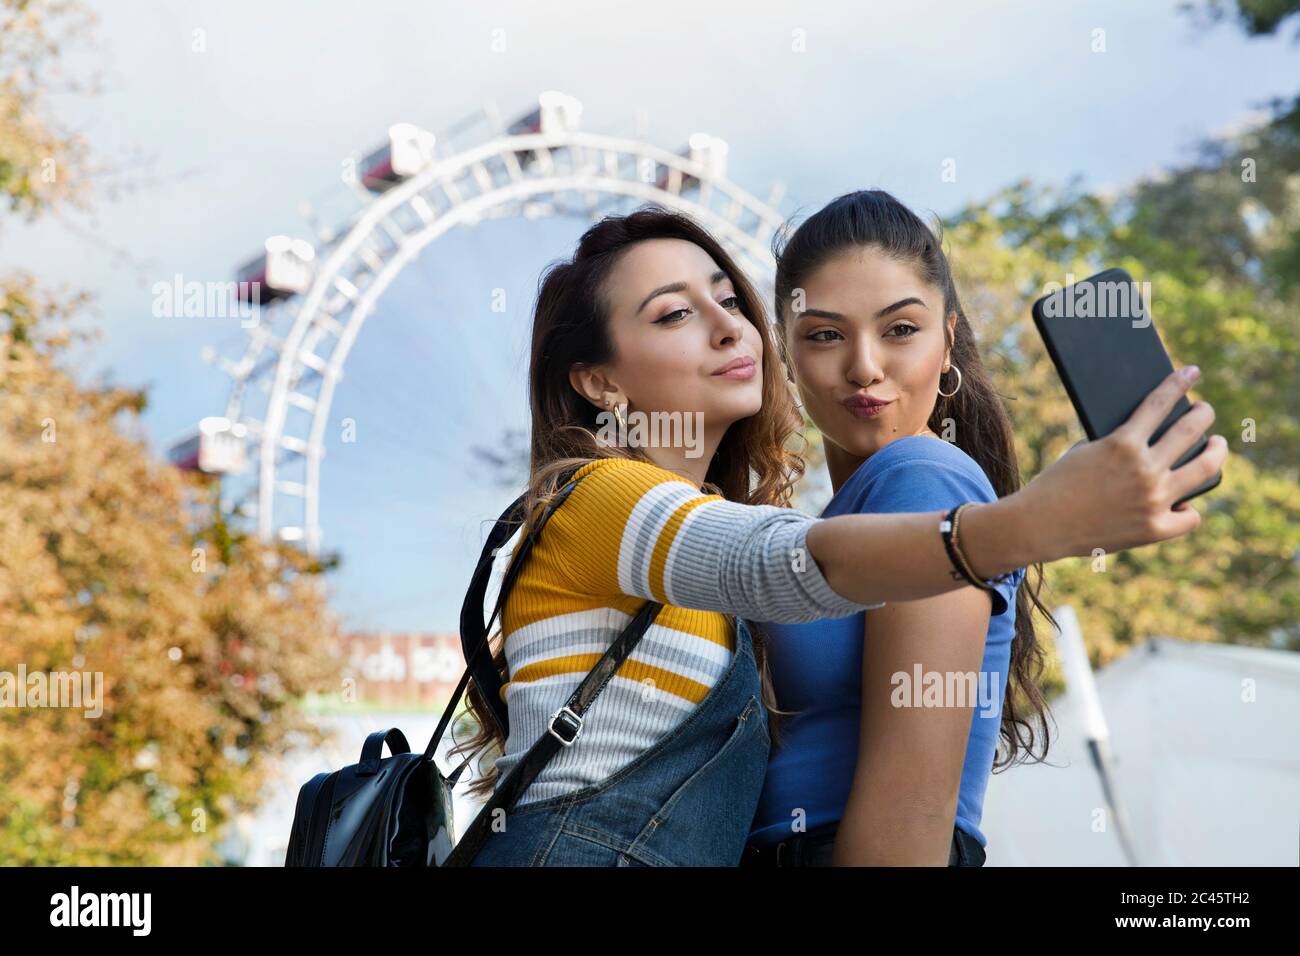 Two young women with long brown hair standing in a park near a Ferris wheel, taking selfie with mobile phone. Stock Photo